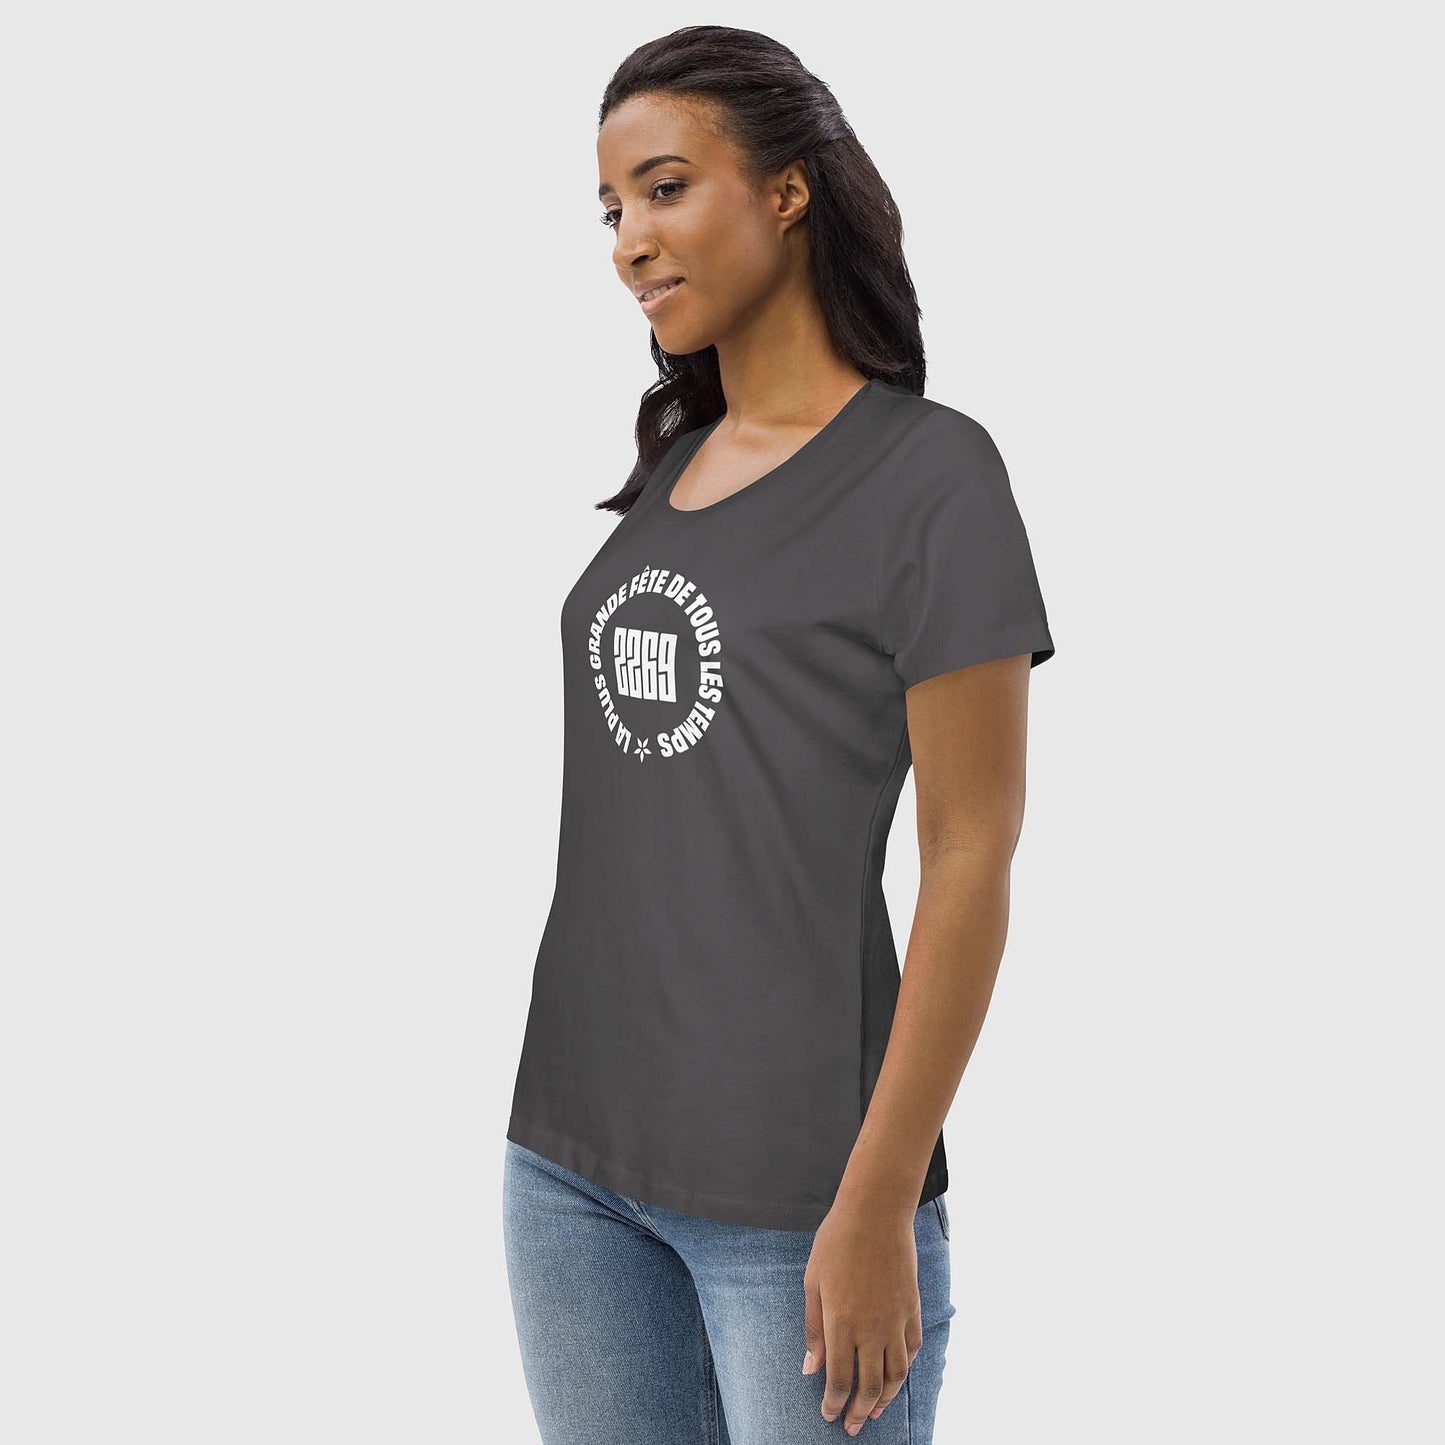 Women's anthracite fitted organic cotton t-shirt with French 2269 party circle